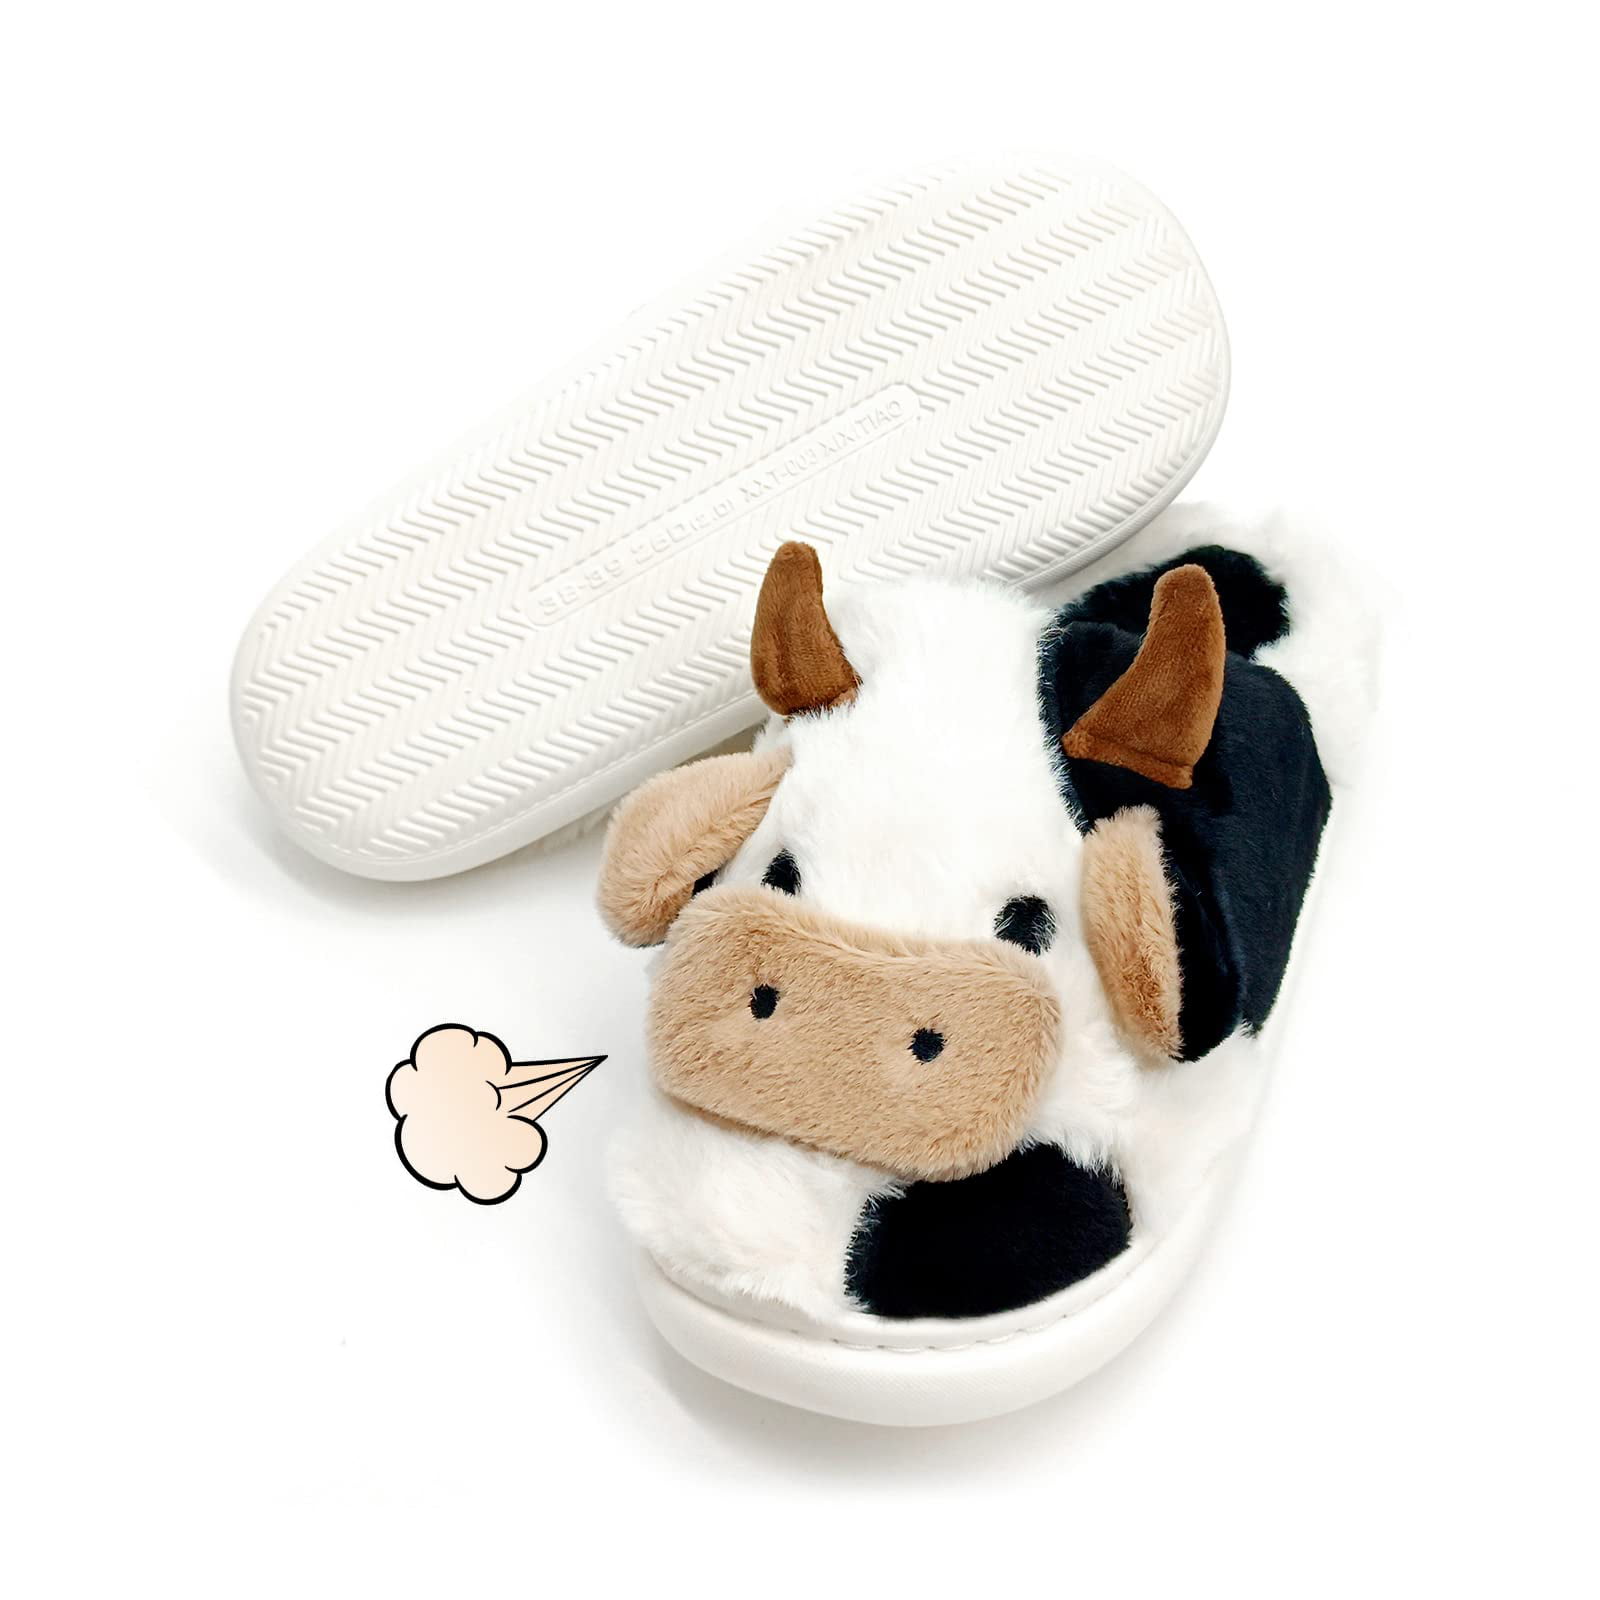 HKDZWSM Cartoon Cow Slippers for Women Girls Cotton Animal Fuzzy Slippers  Slip-On Cute Fluffy Cow Slides Boys Mens Warm Plush House Slippers for  Winter 